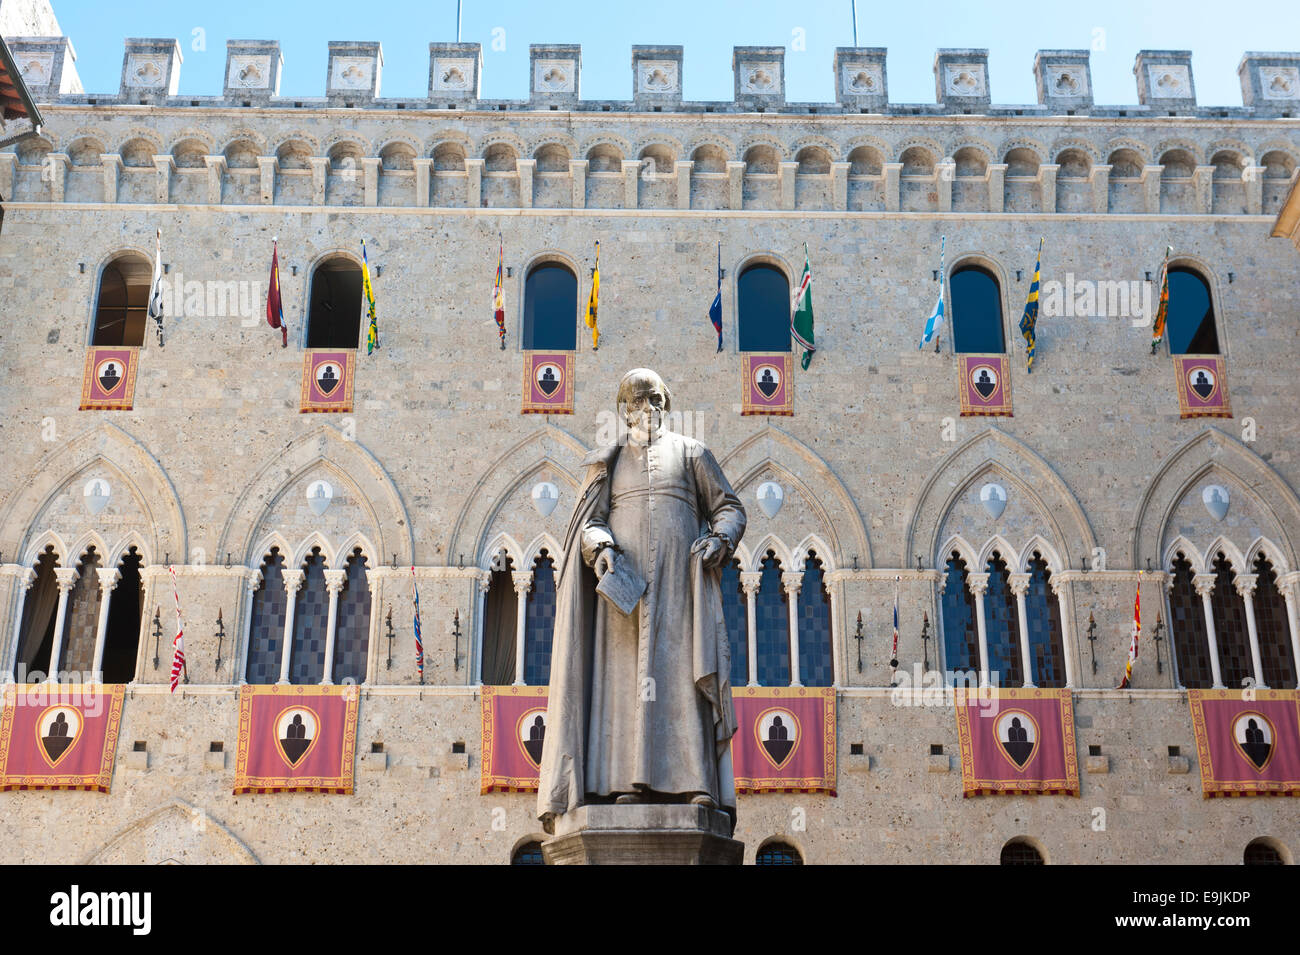 Banca Monte Dei Paschi Di Siena High Resolution Stock Photography And Images Alamy